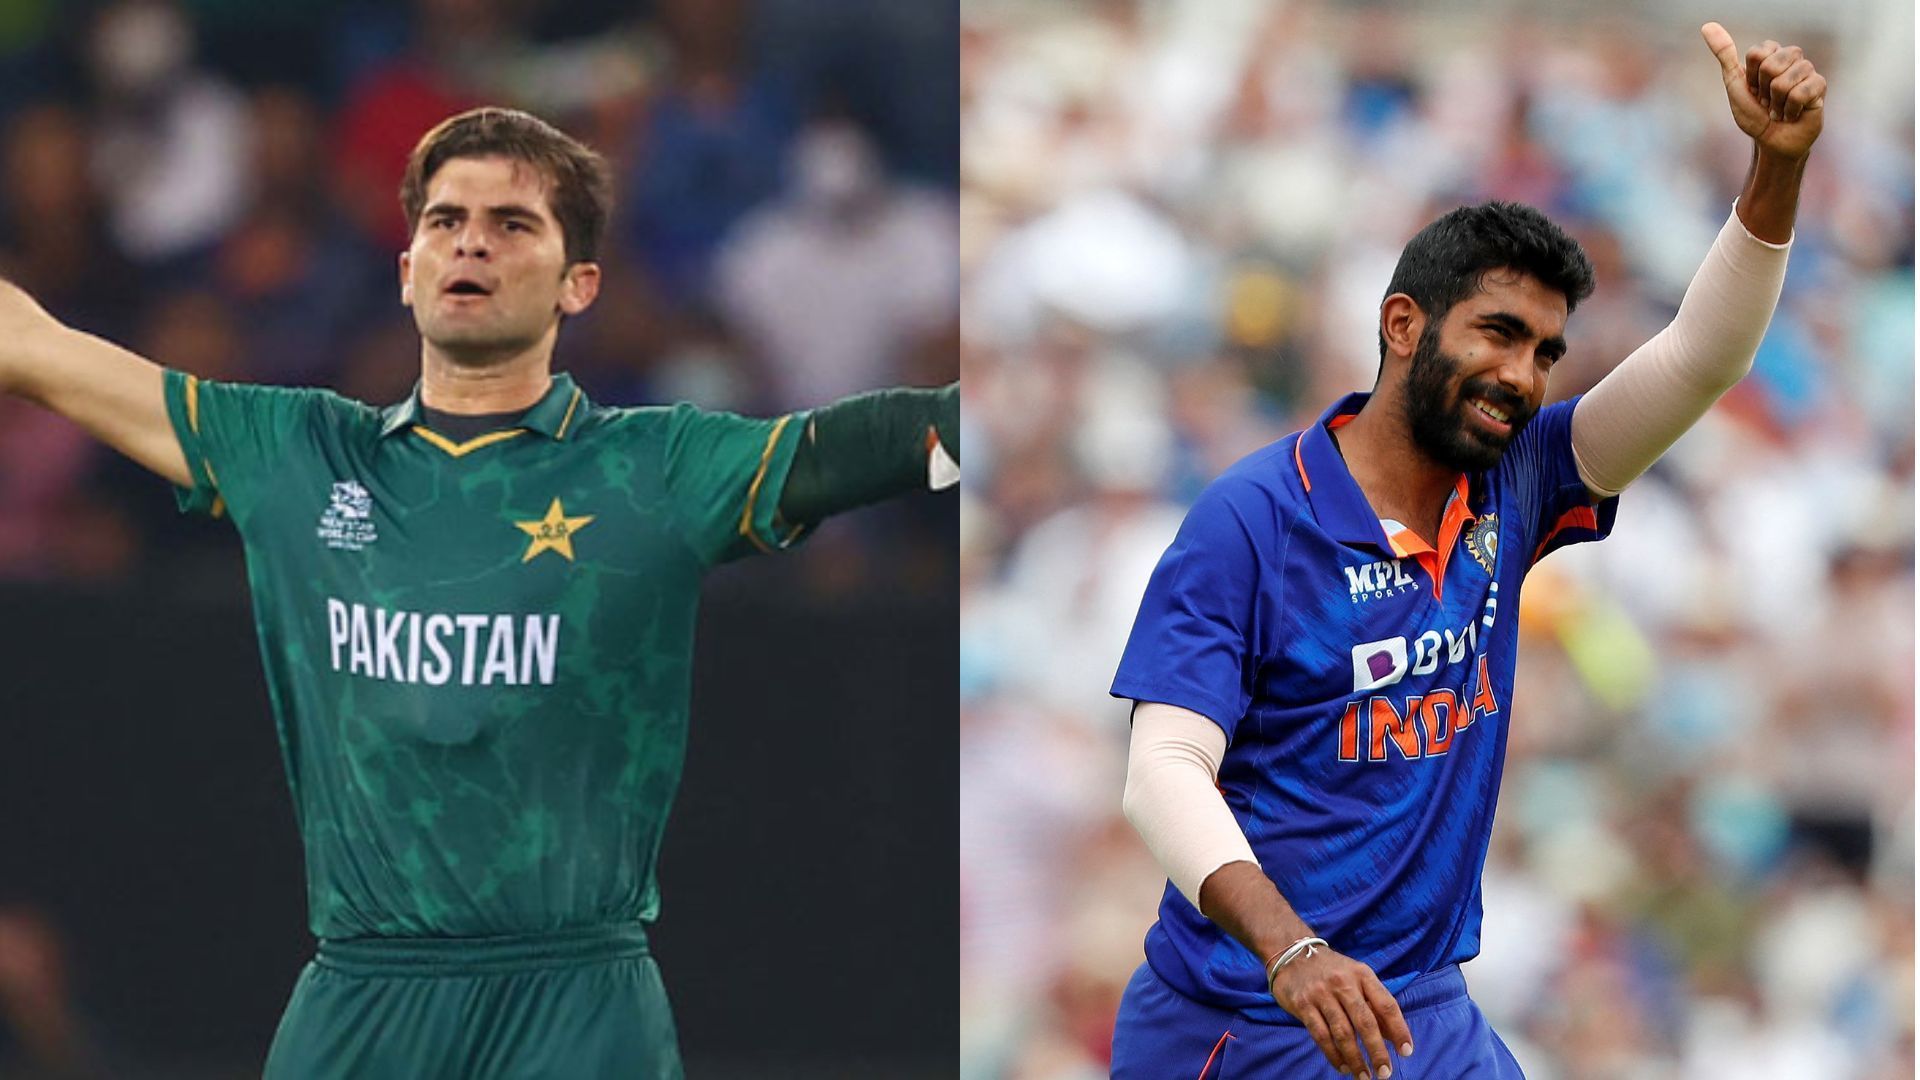 IND vs PAK 2022: &quot;Had they been there, the competition would have been a little bit better&quot; - RP Singh on the absence of Jasprit Bumrah and Shaheen Afridi 